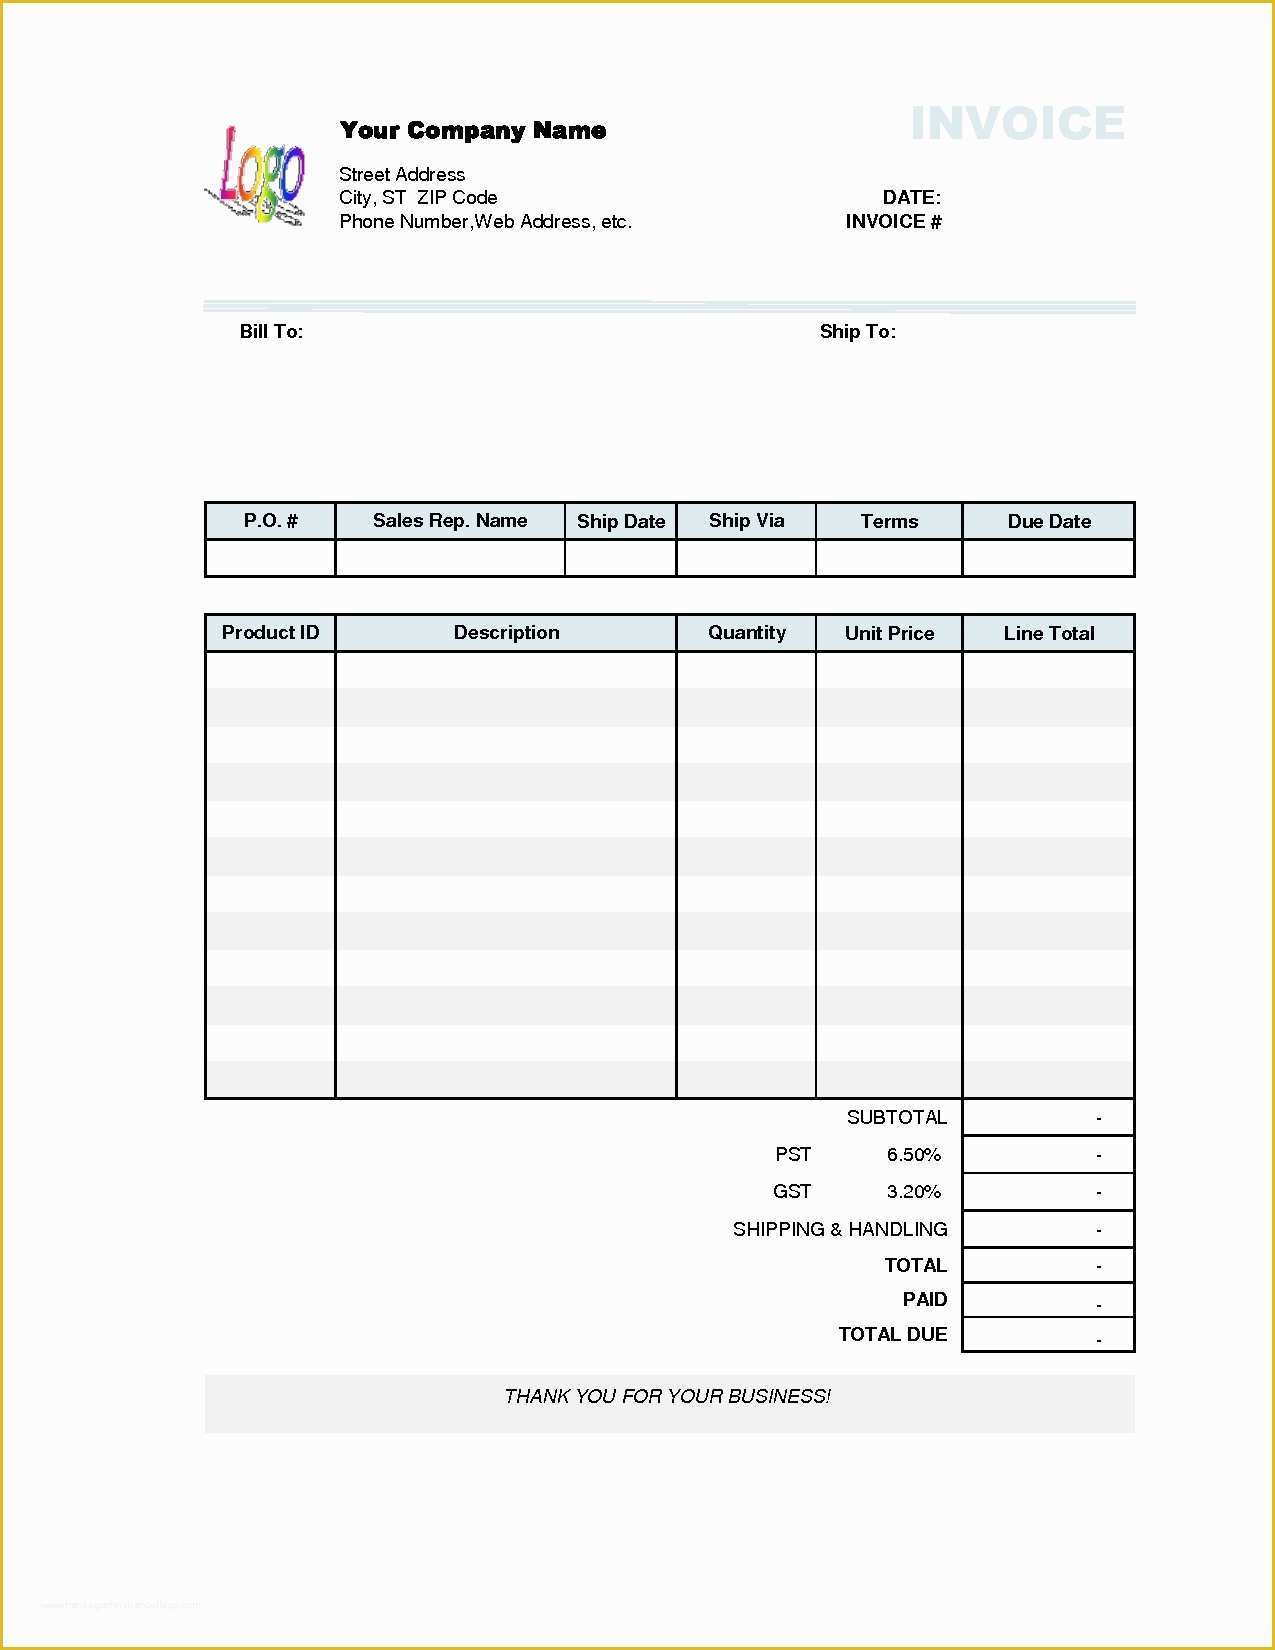 Basic Invoice Template Free Of Sample Invoices for Small Business Invoice Template Ideas